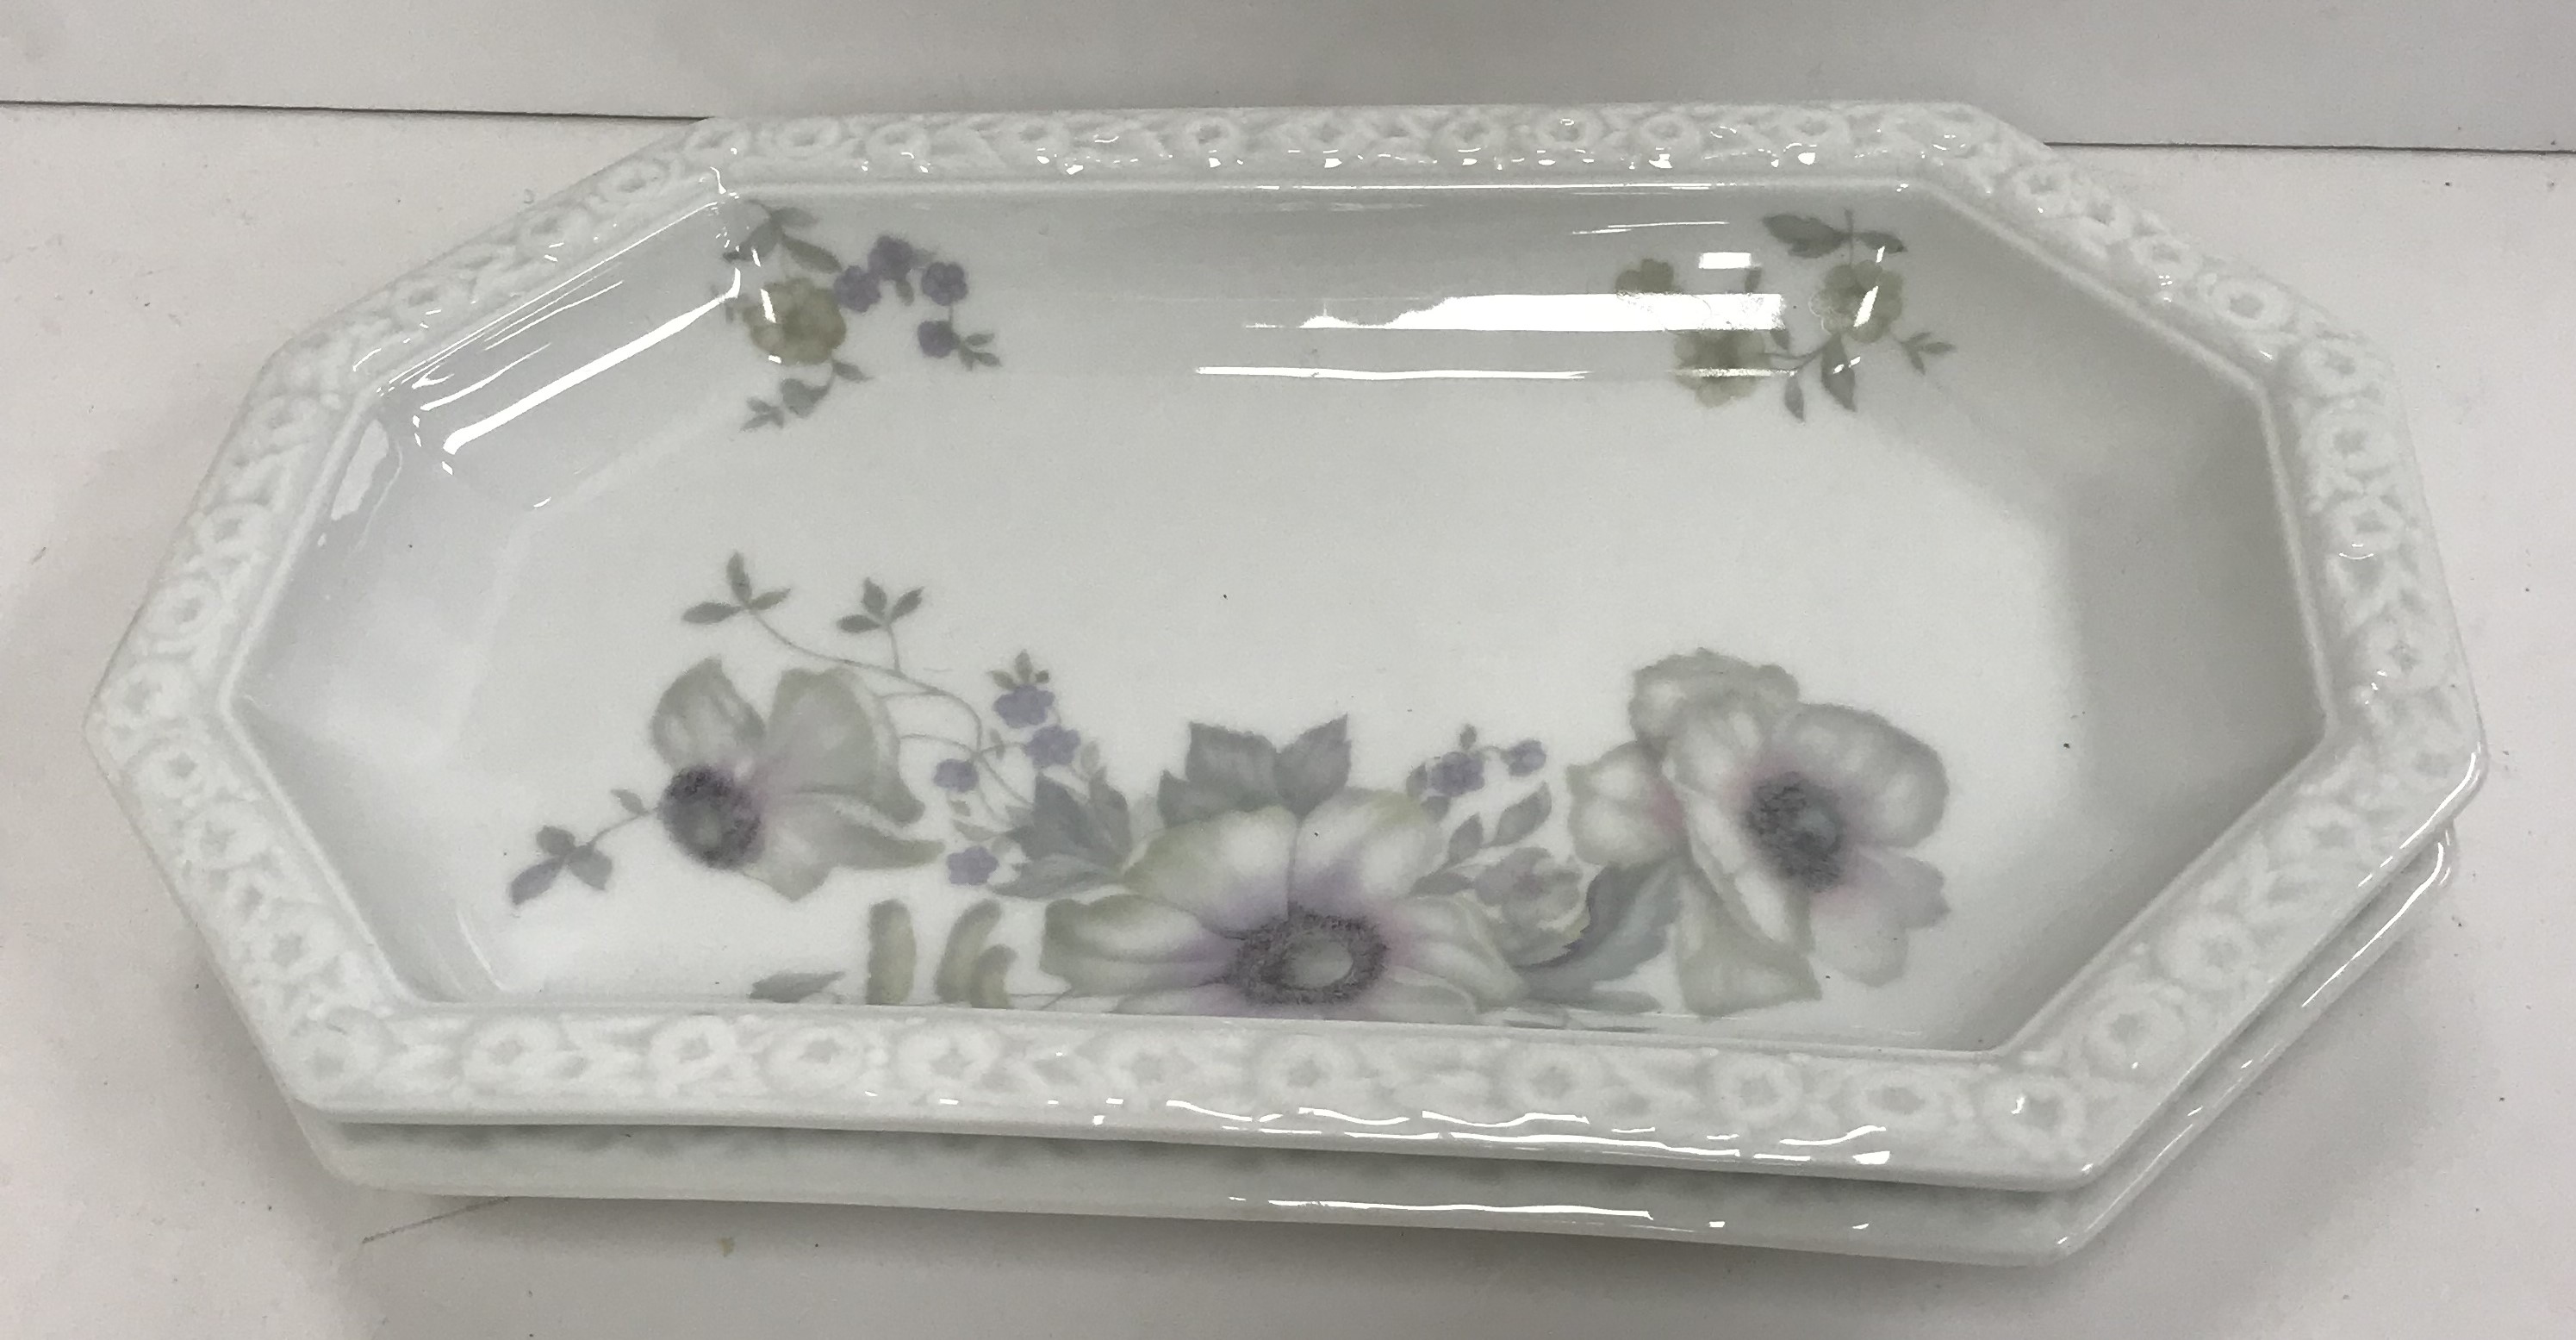 A Rosenthal "Maria" pattern floral decor - Image 3 of 12